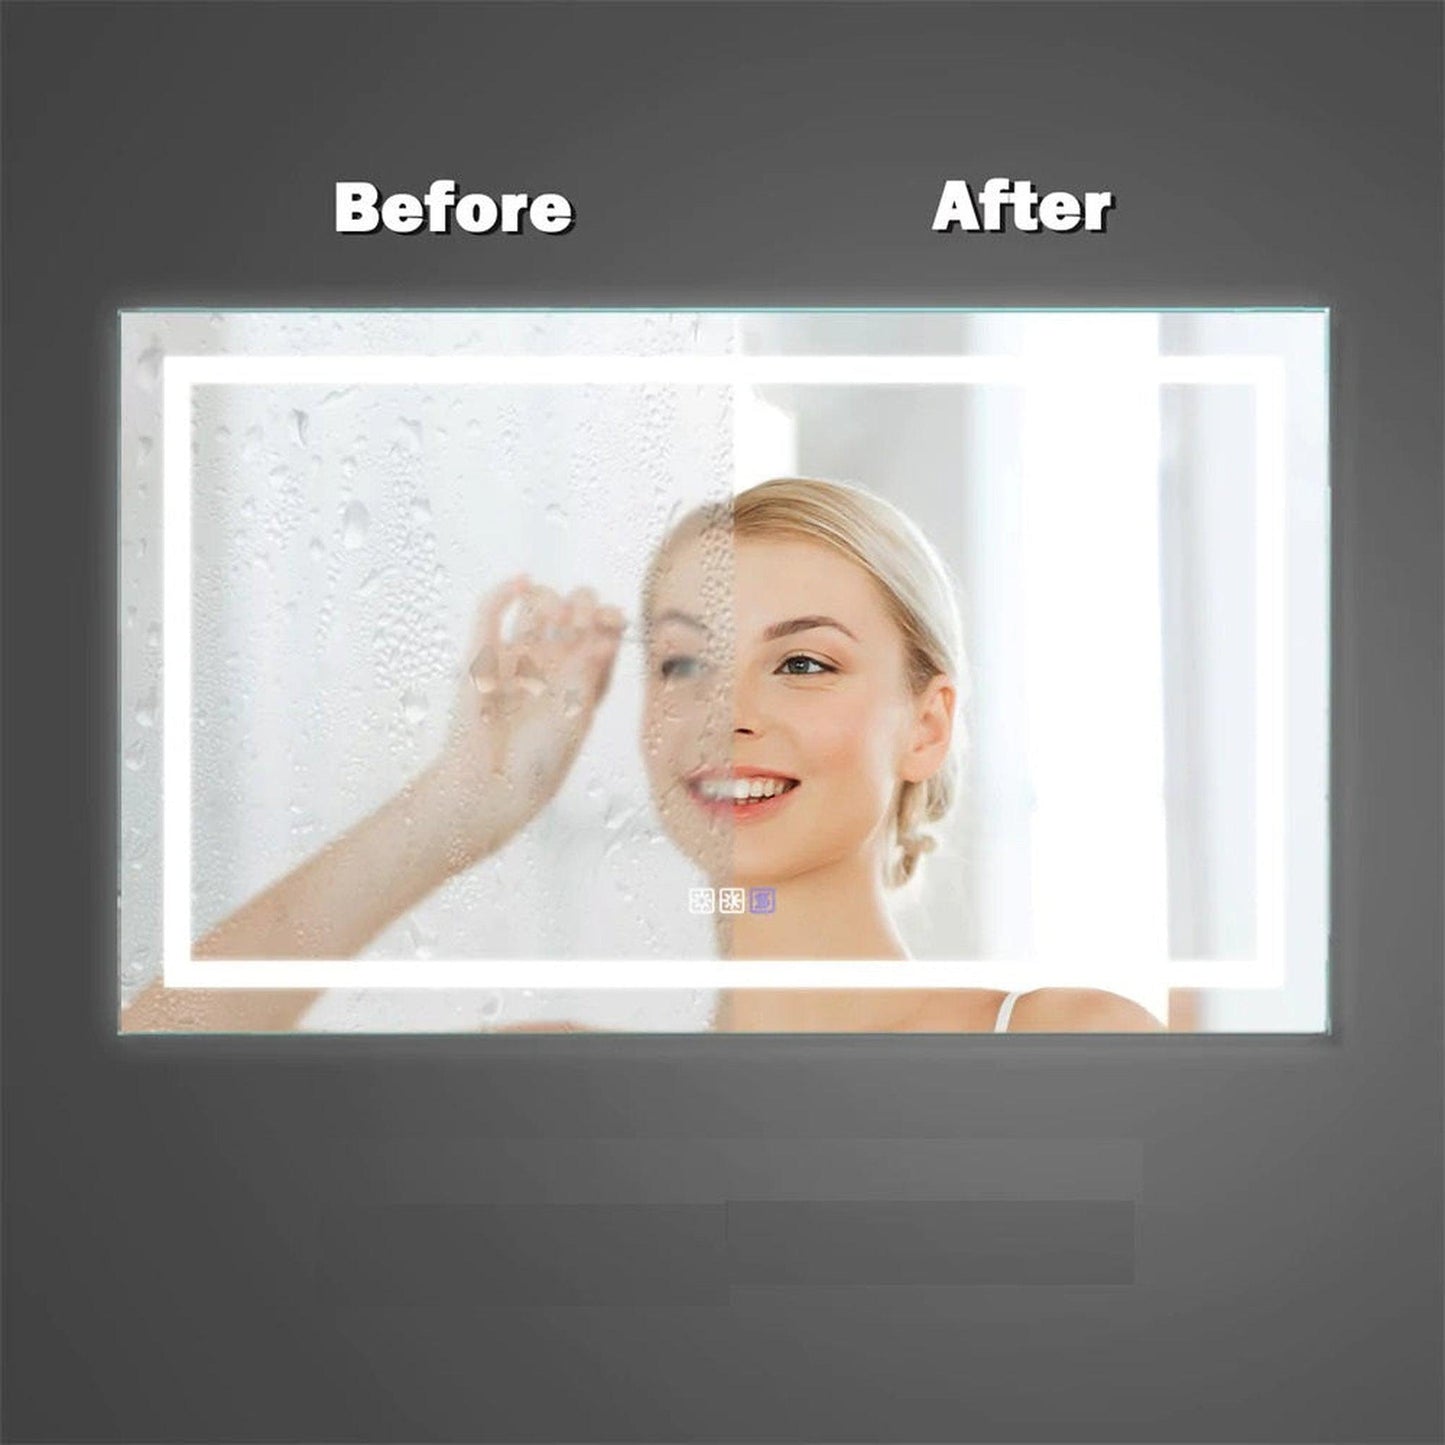 ExBrite Third Generation 40" x 24" Frameless LED Super Slim Bathroom Vanity Mirror With Clock, Night Light, Anti Fog, Dimmer, Touch Button and Waterproof IP44